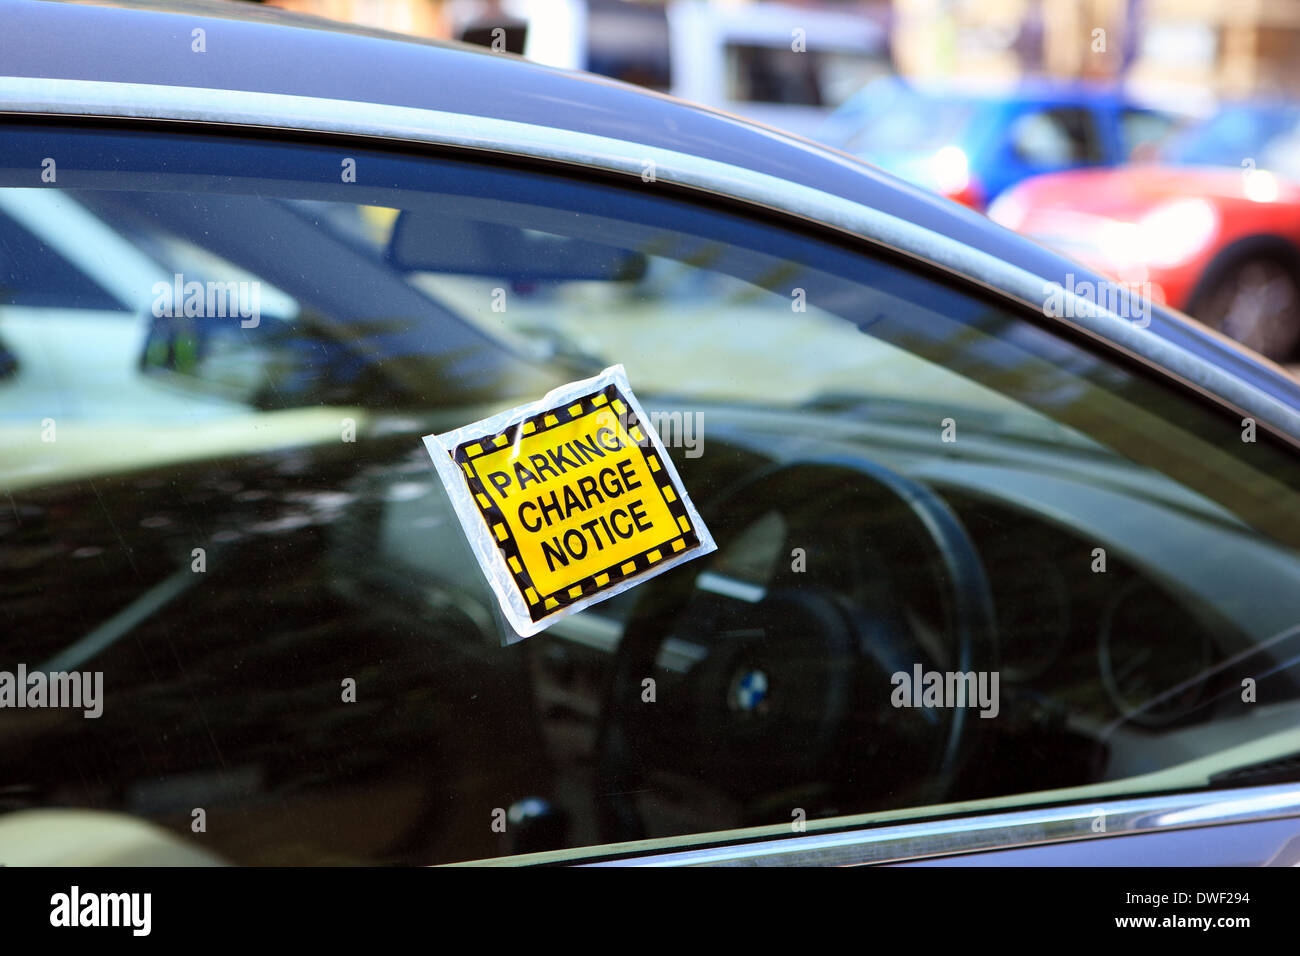 Parking charge notice on a car window Stock Photo